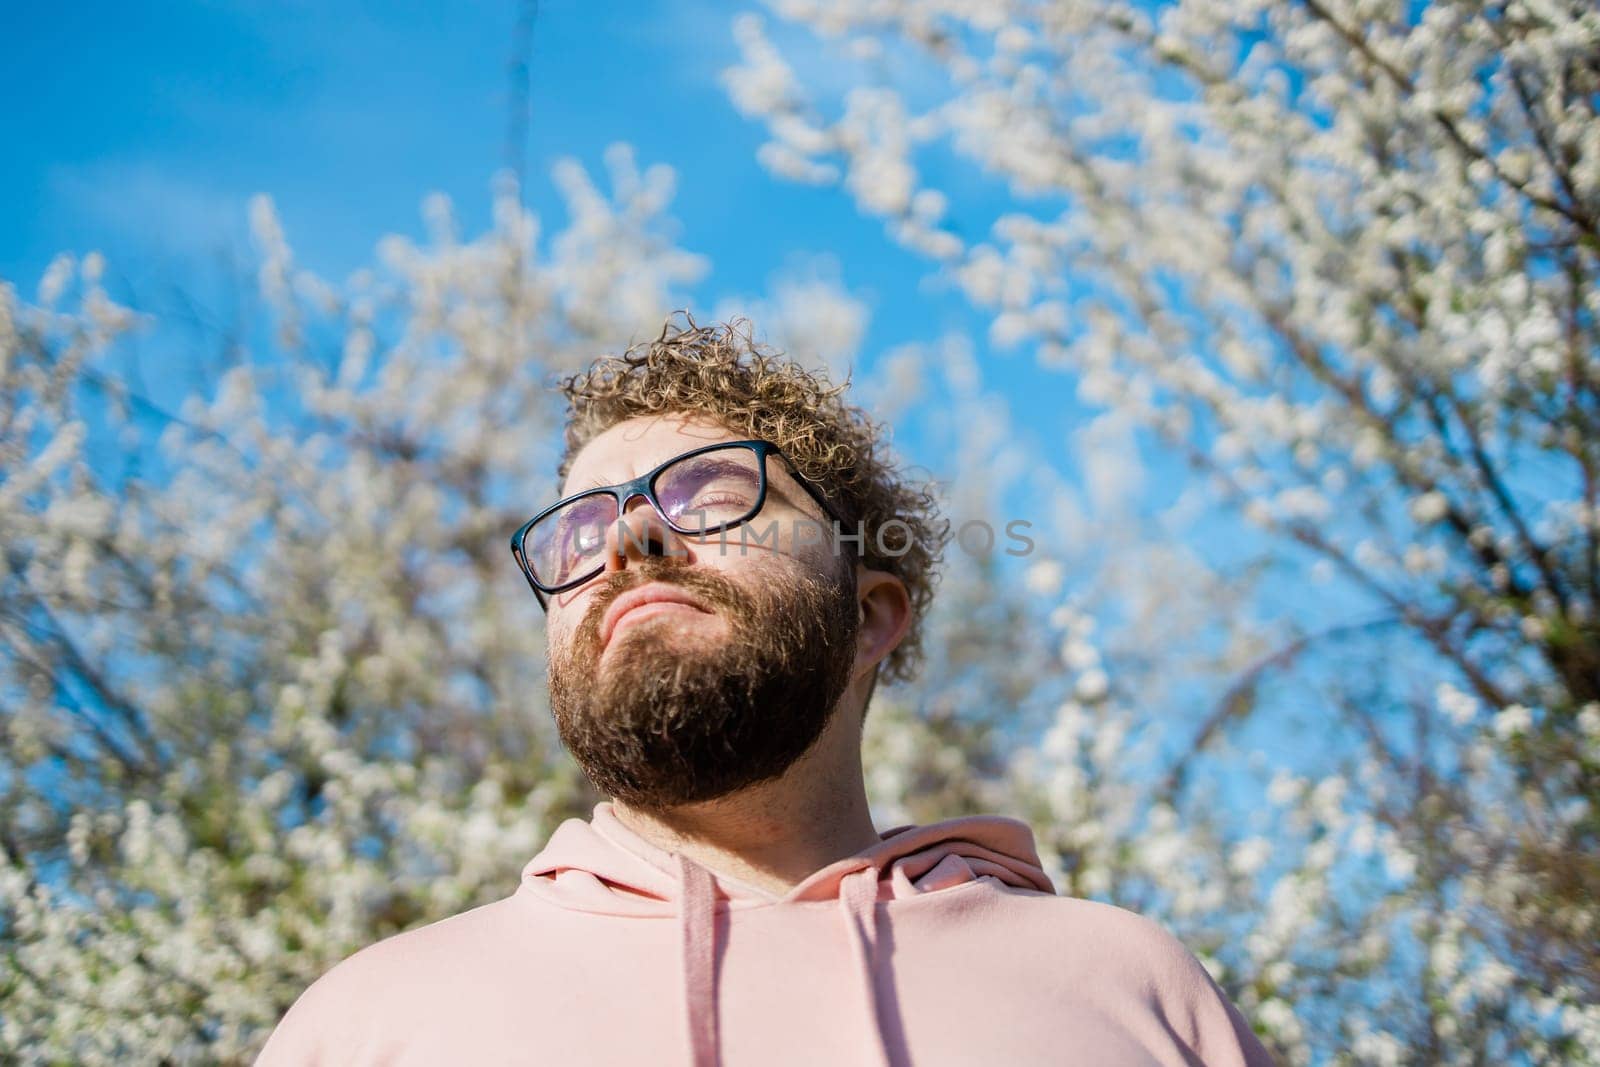 Handsome man outdoors portrait on background cherry blossoms or apple blossoms and blue spring sky. Millennial generation guy and new masculinity